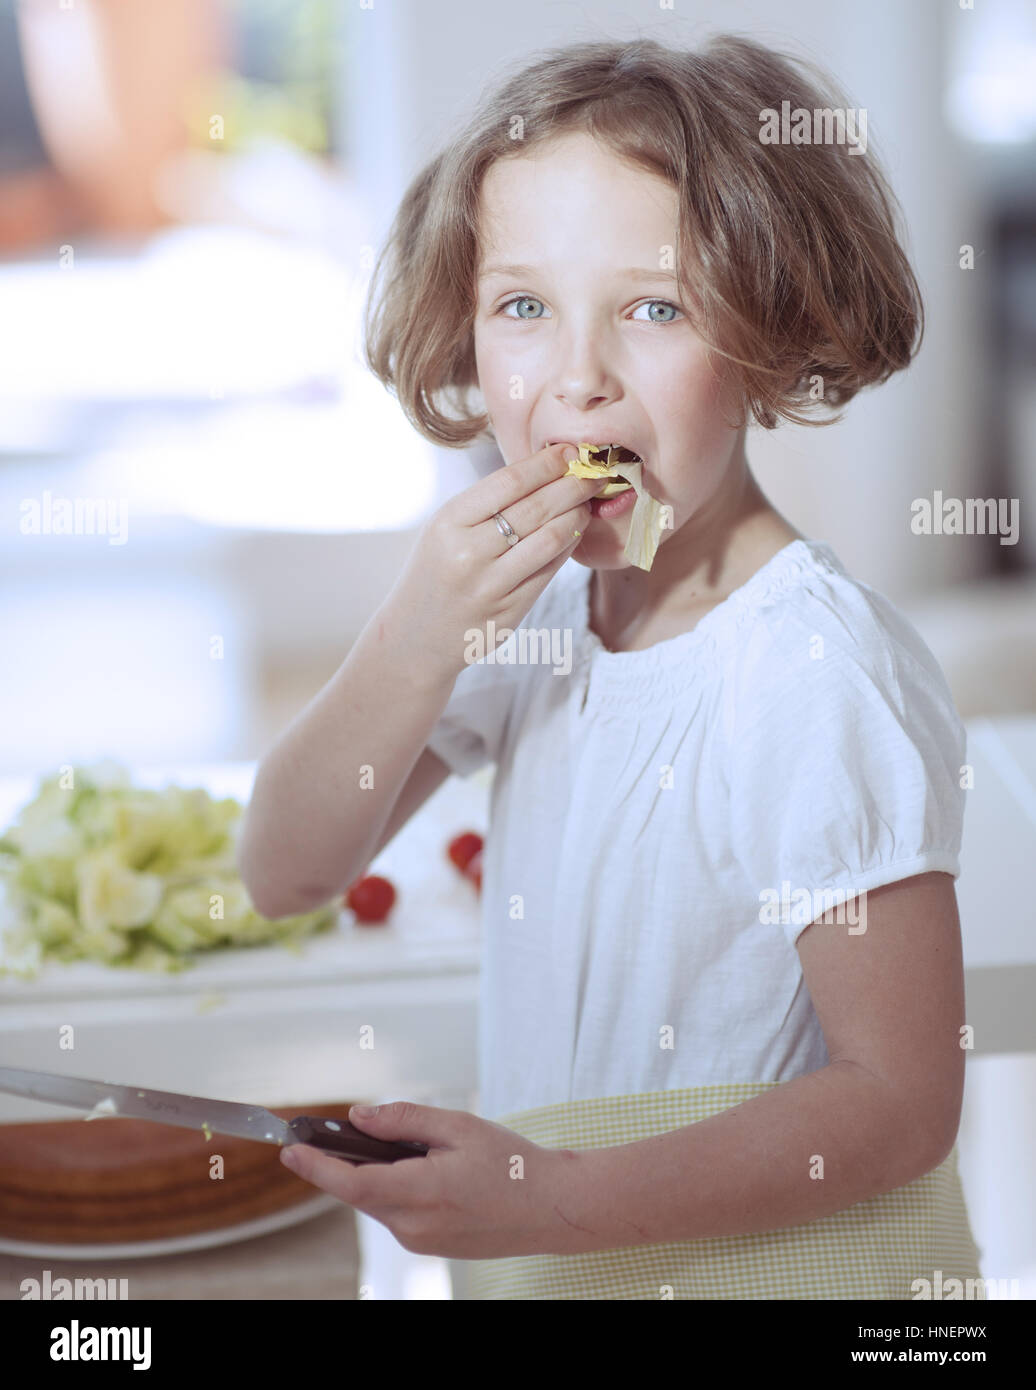 Young girl eating salad whilst holding knife in kitchen Stock Photo